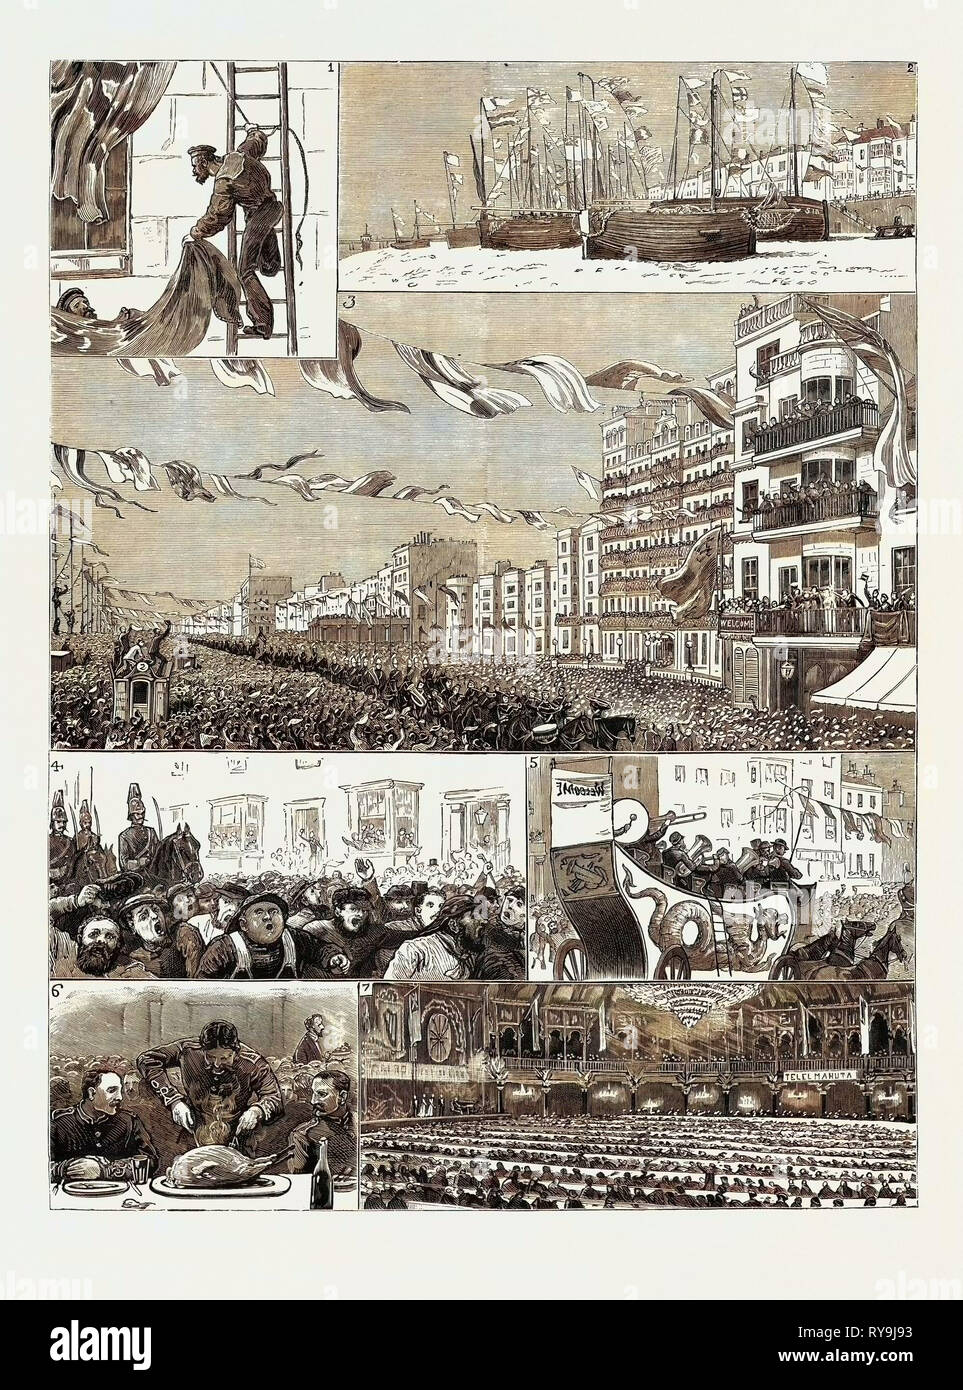 The Return of the Troops from Egypt, Reception of the Fourth Dragoon Guards Brighton: 1. Coast Guards Hanging Bunting, 2. The Fishermen's Tribute, 3. The Procession in the King's Road, 4. The Saline Guard, 5. The Town Band at the End of the Procession, 6. Assaulting Turkey, 7. The Banquet Stock Photo